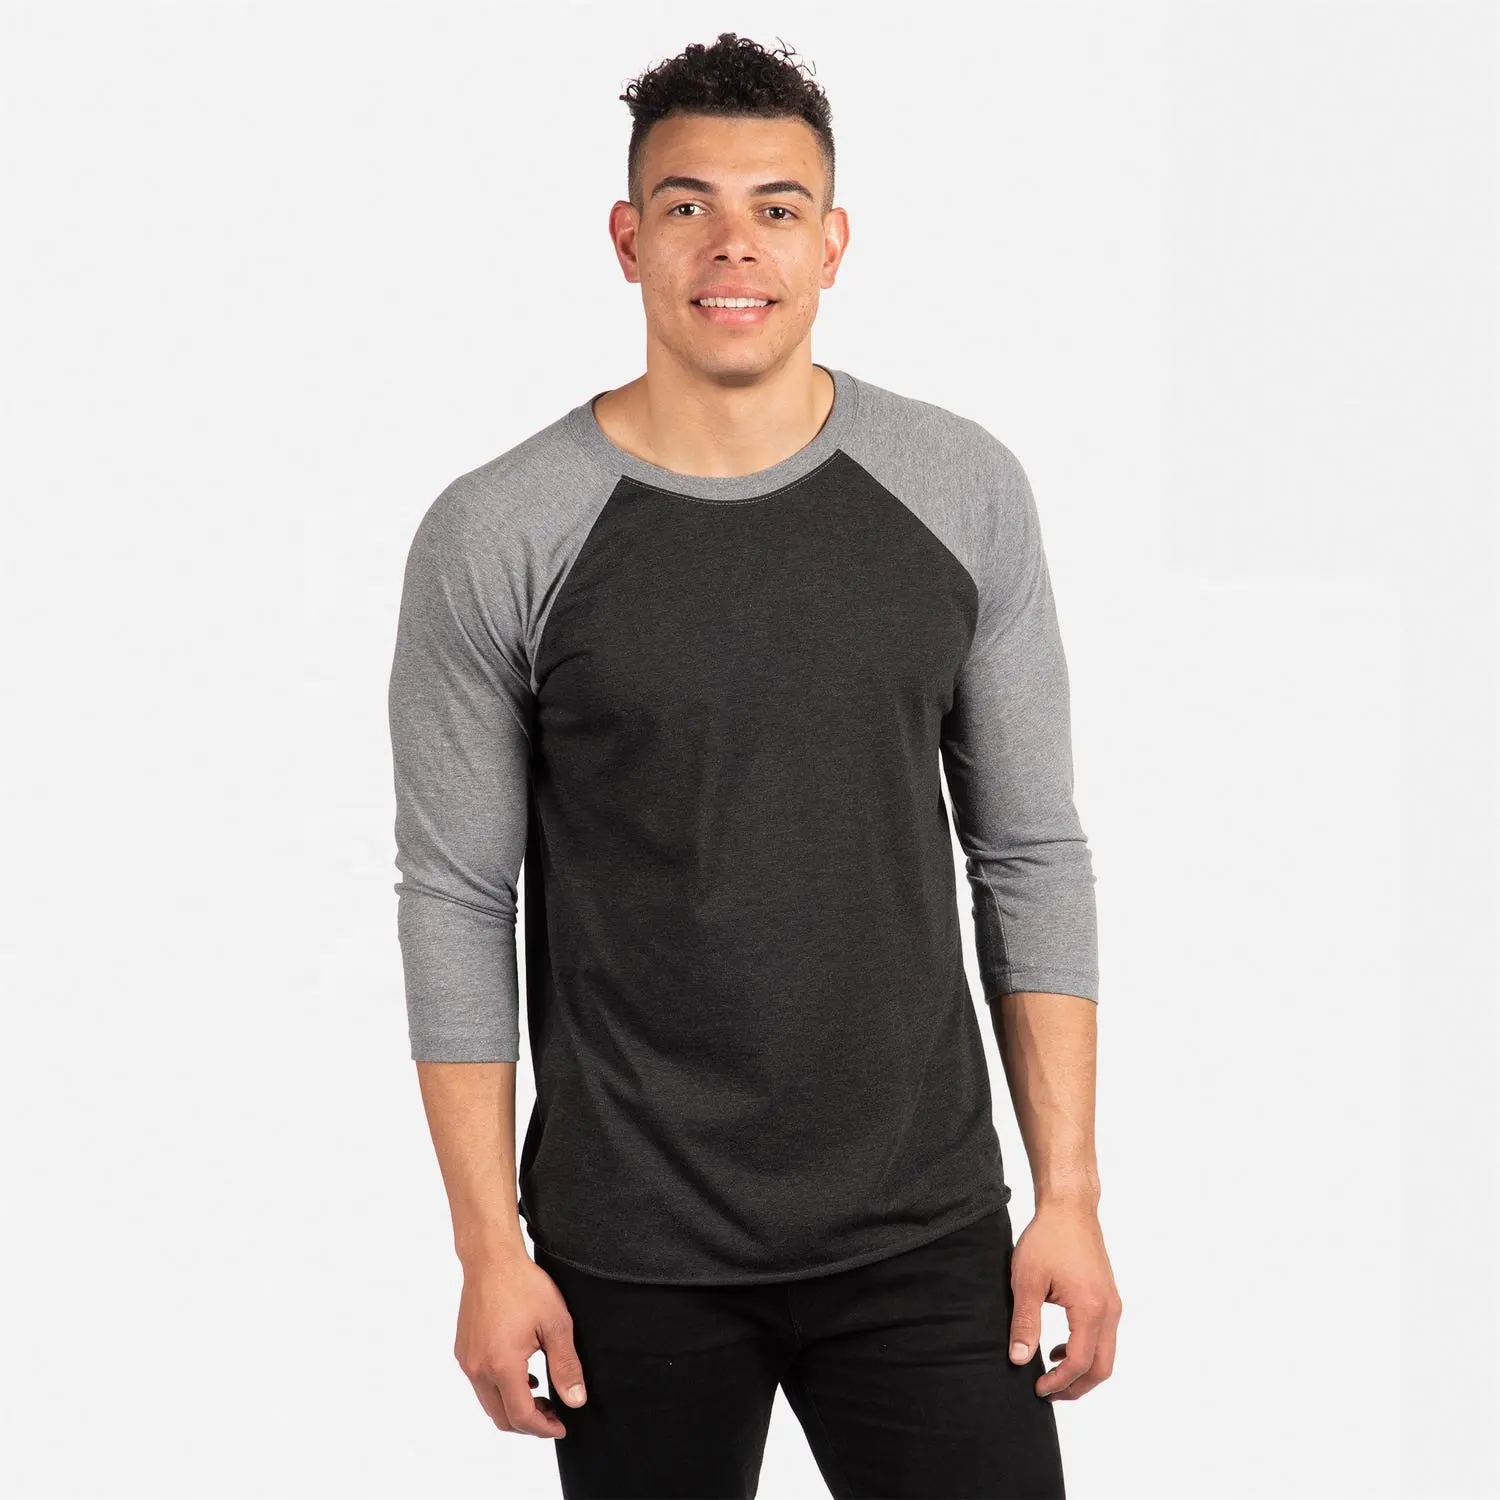 Next Level Apparel Tri-Blend Men 3/4 Raglan Sleeve Tee - made from 50% polyester, 25% cotton and 25% rayon breathable